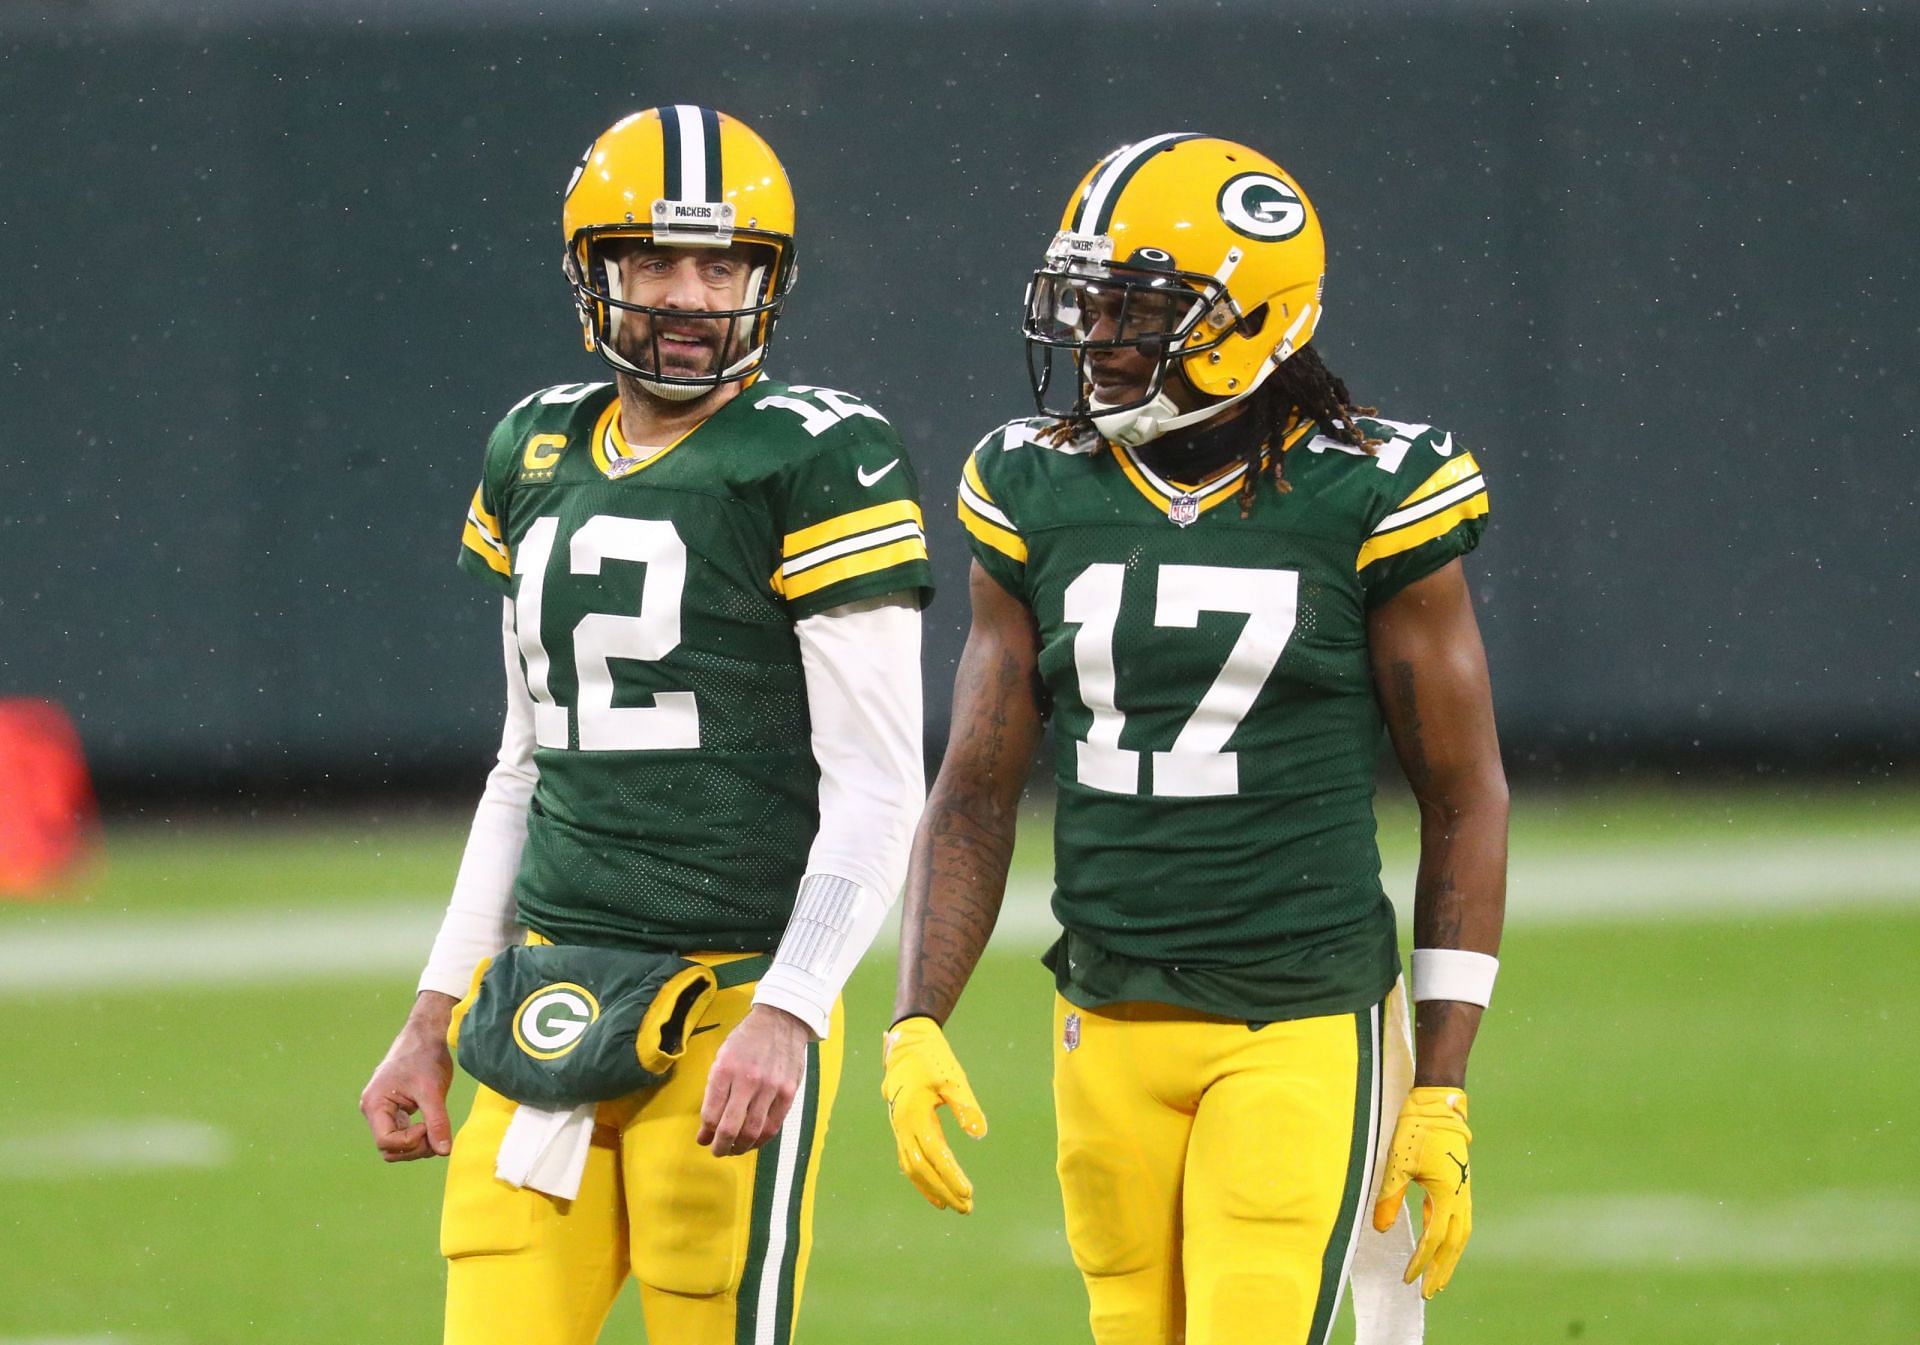 Green Bay Packers QB Aaron Rodgers and Green Bay Packers WR Davante Adams